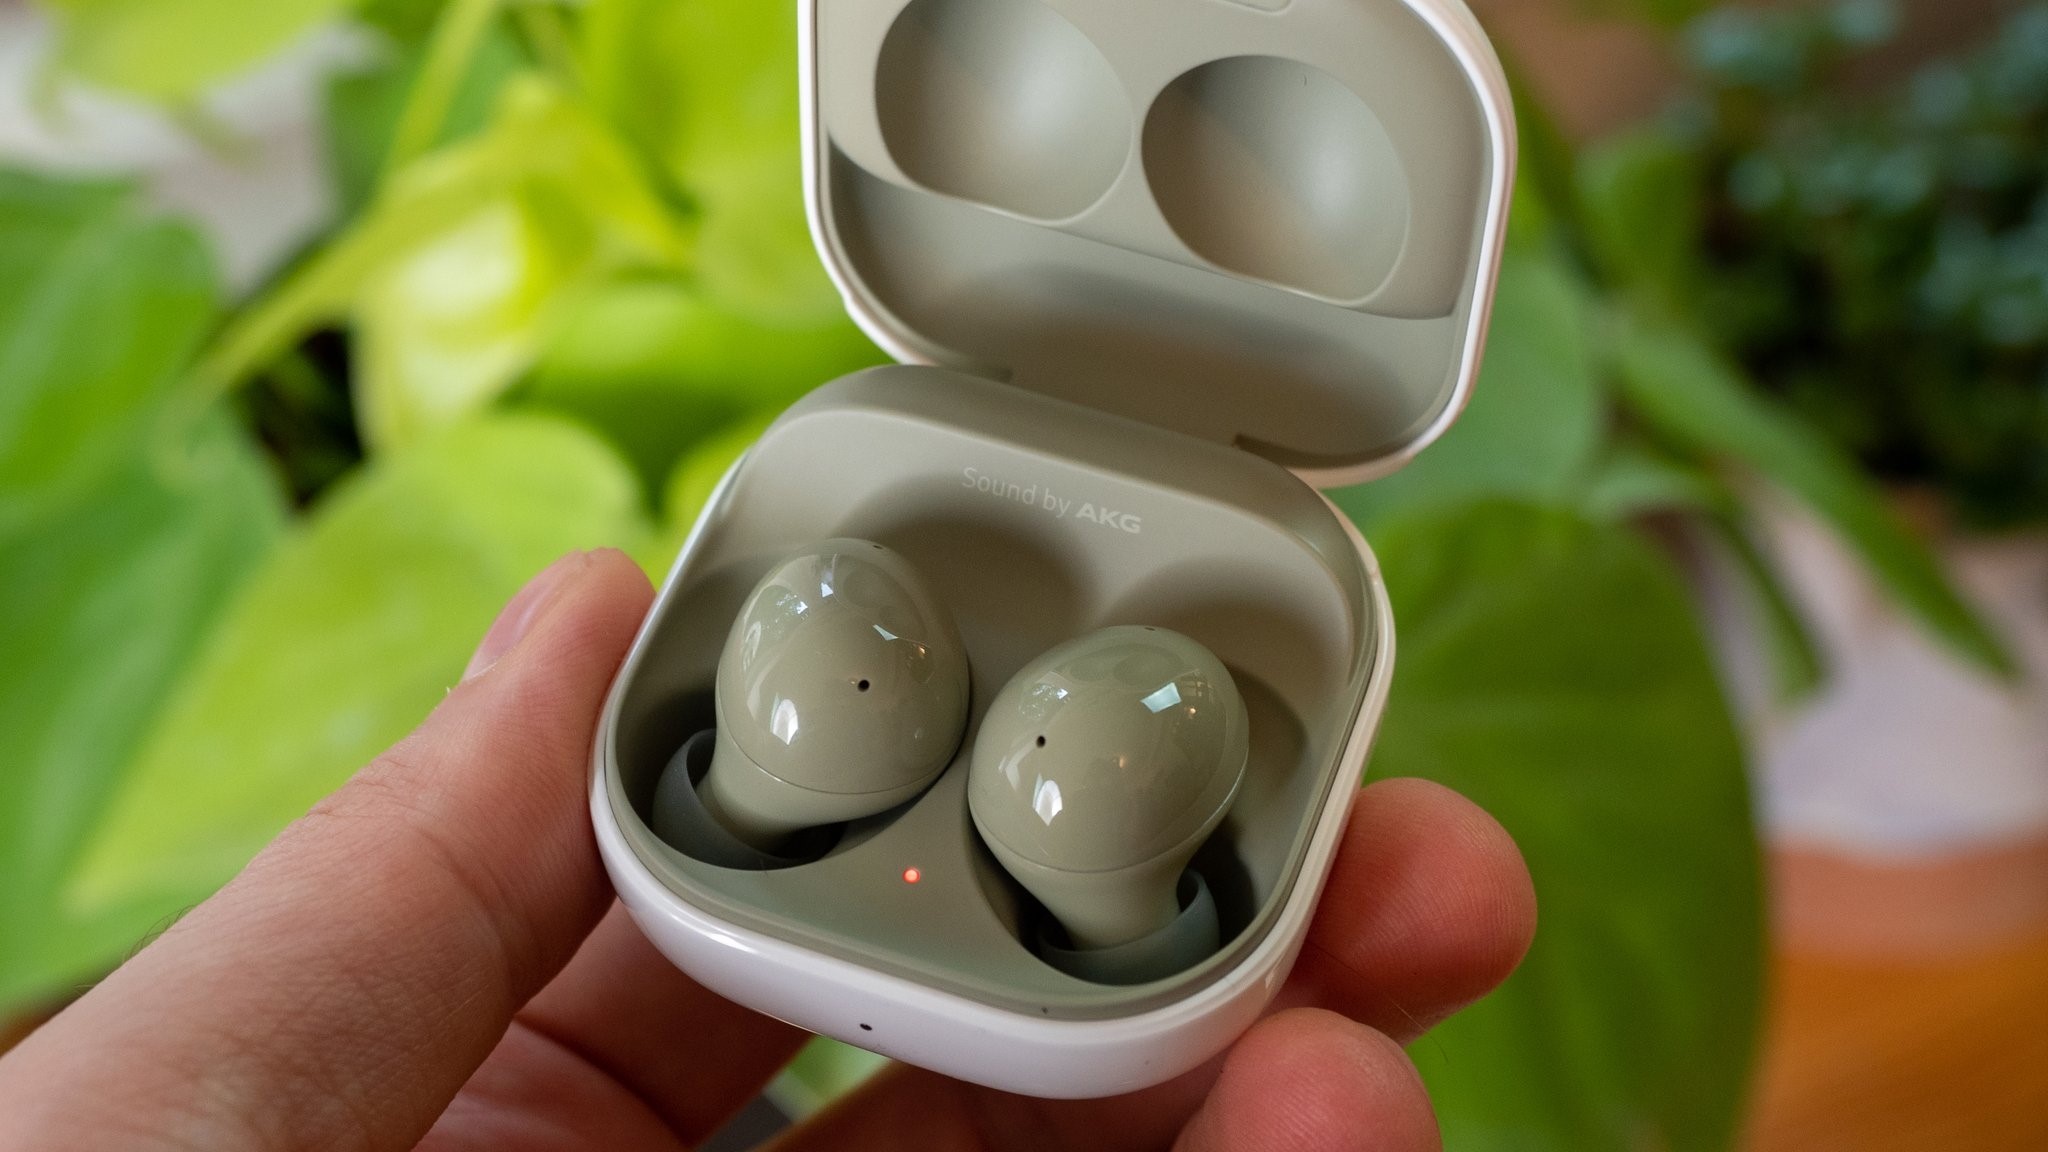 Samsung Galaxy Buds 2 in front of plant